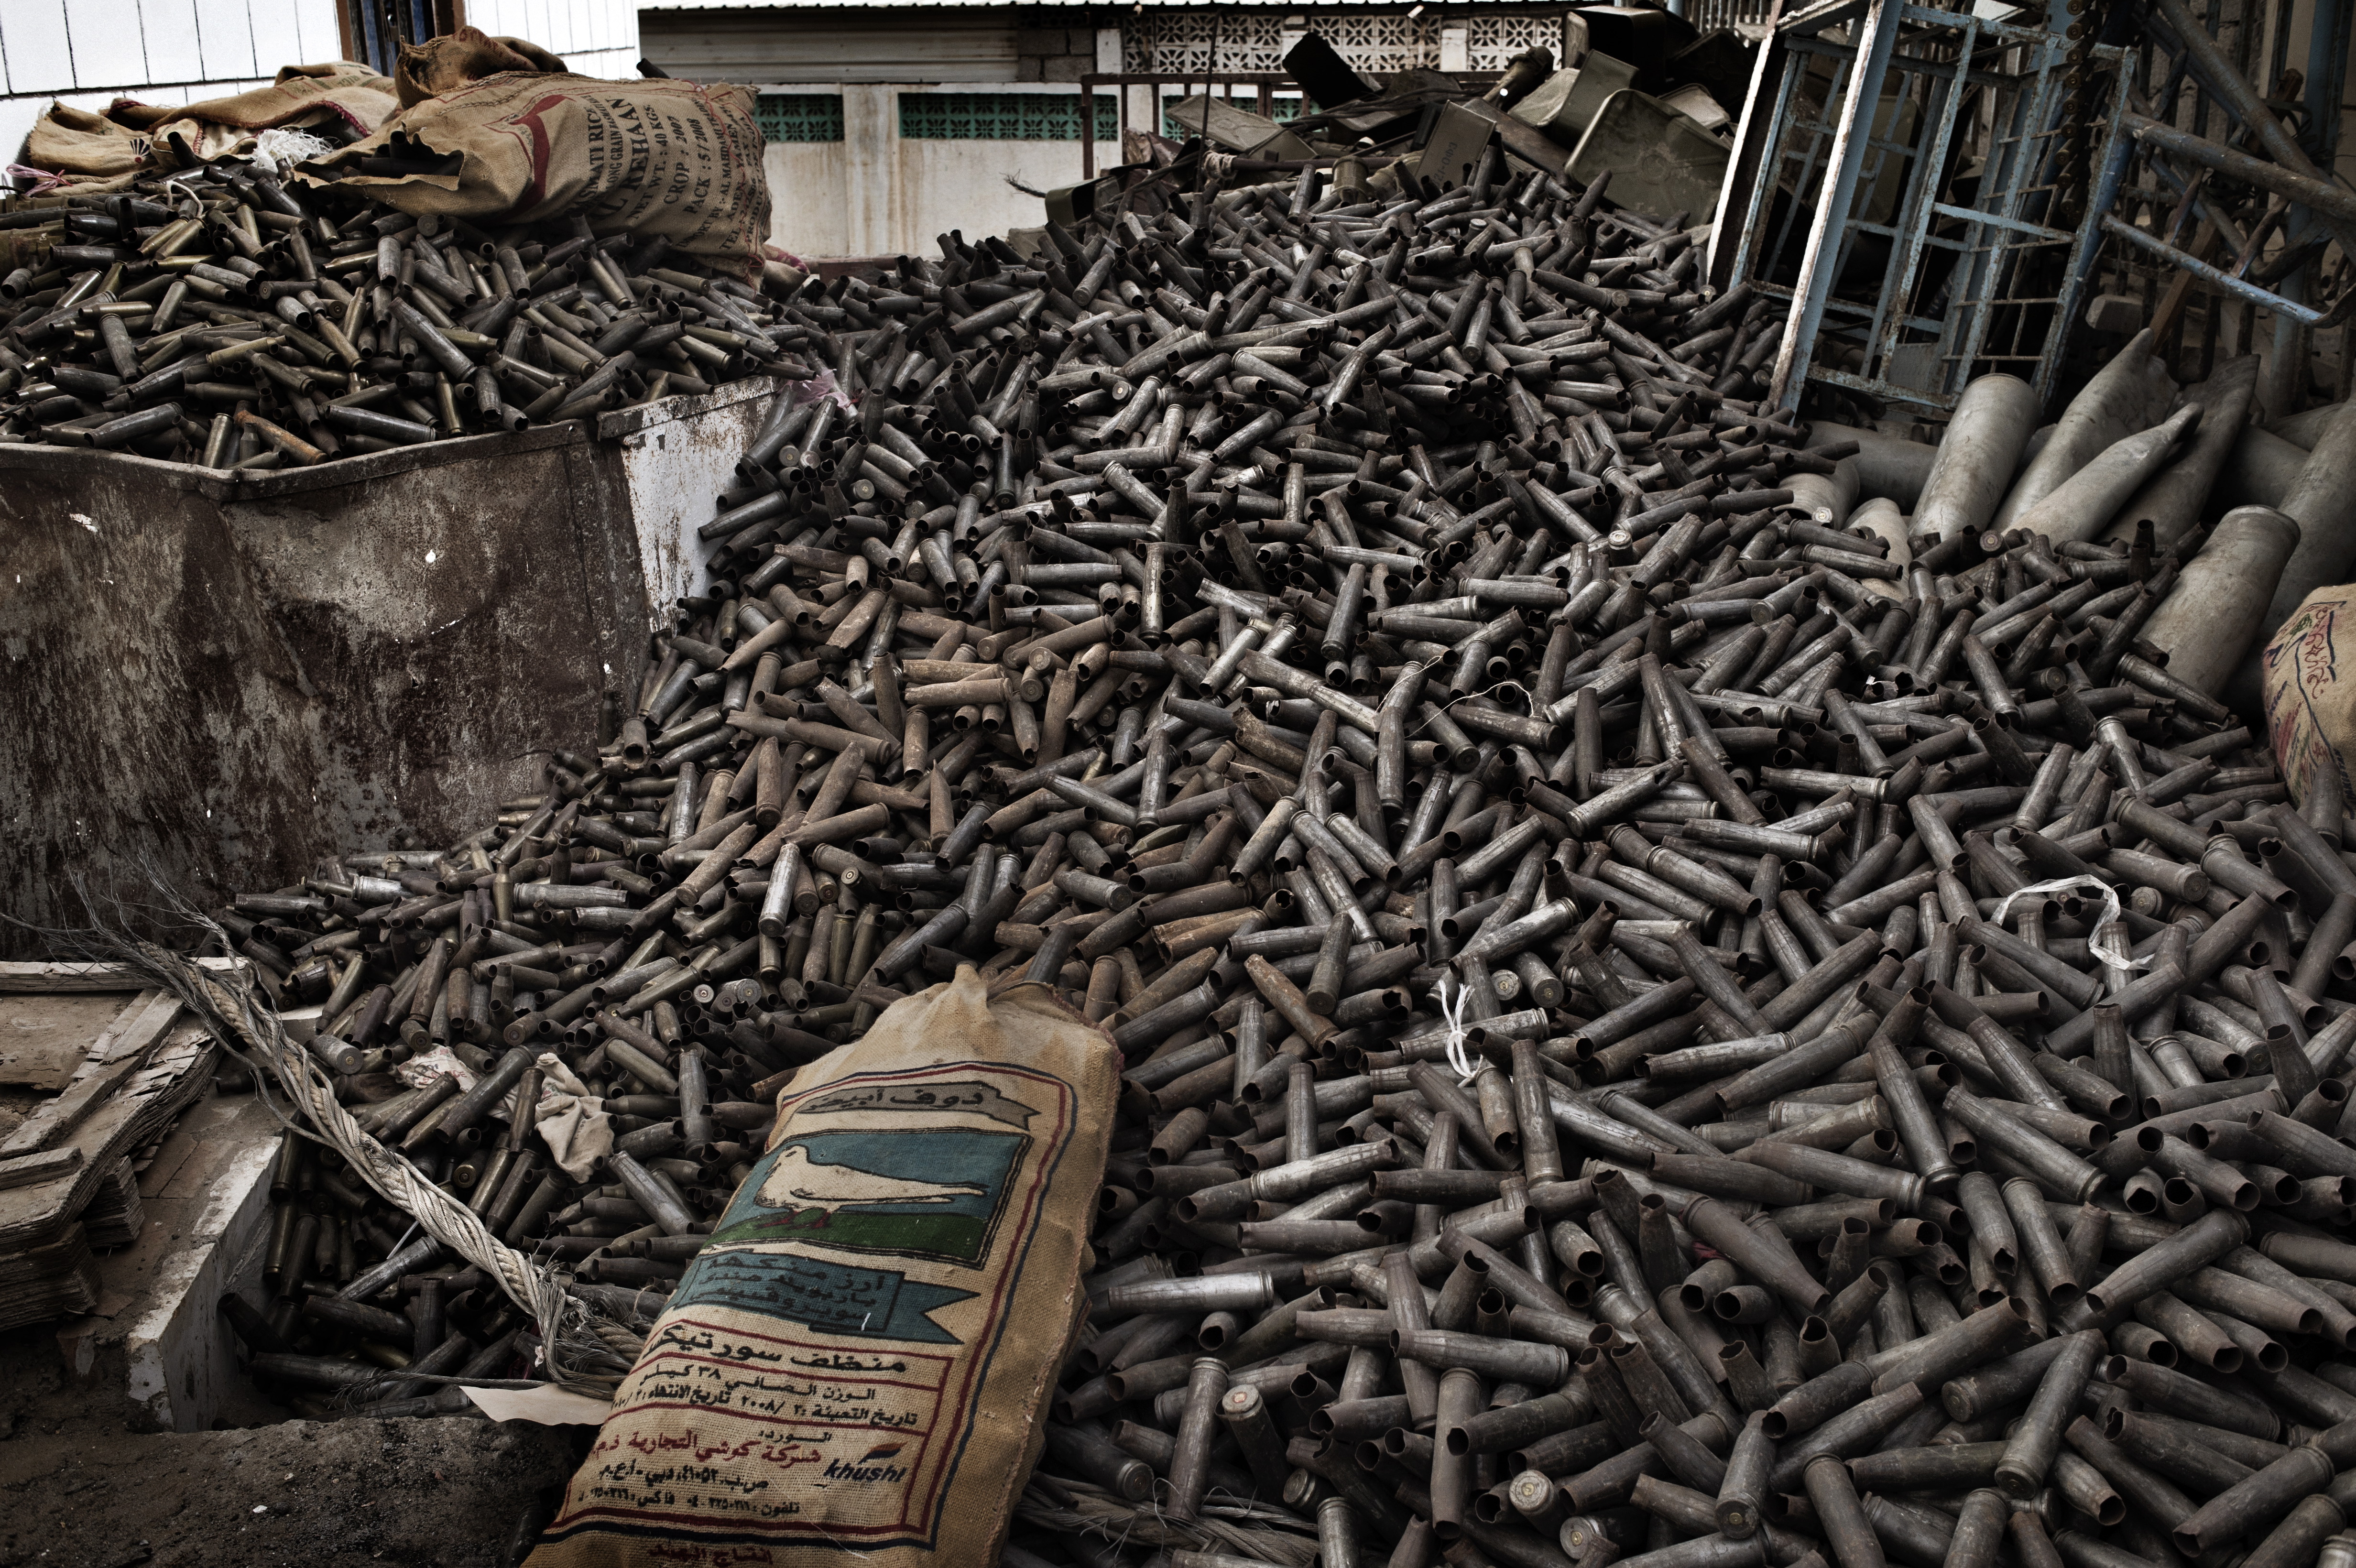 In Zinjibar, in Abyan province, used machine-gun shells, tank shells and rocket containers are gathered to be sold as scrap. al-Qaeda in the Arabian Peninsula (AQAP) occupied a big swath of Abyan before being driven out by a combination of government troops, armed groups of citizens and U.S. drone attacks.